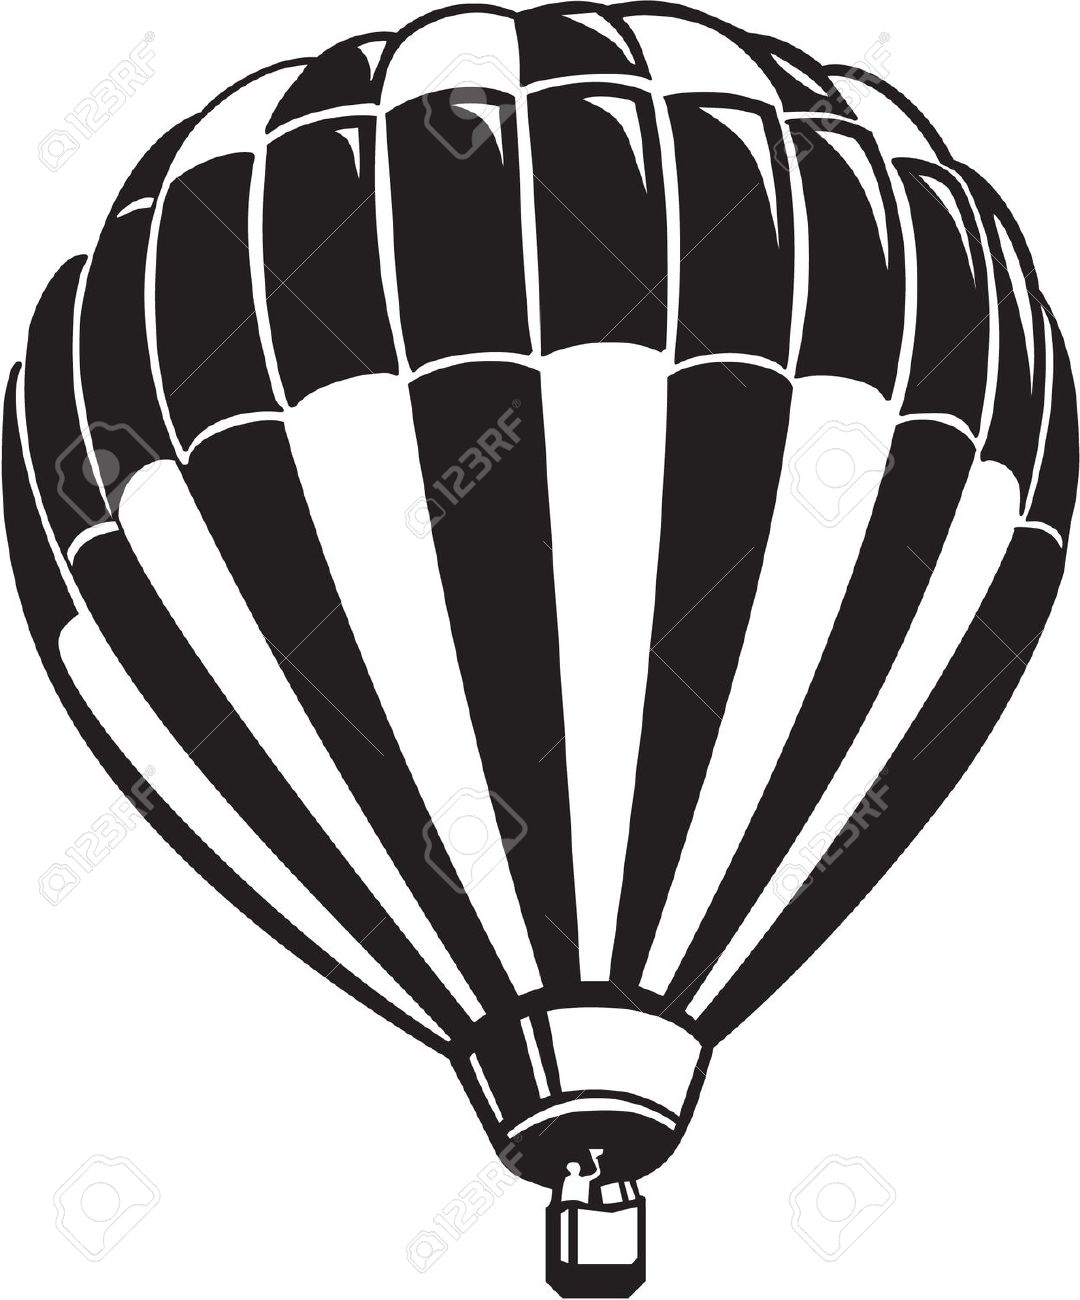 Hot air balloon  black and white aerial balloon clipart black and white clipartfest